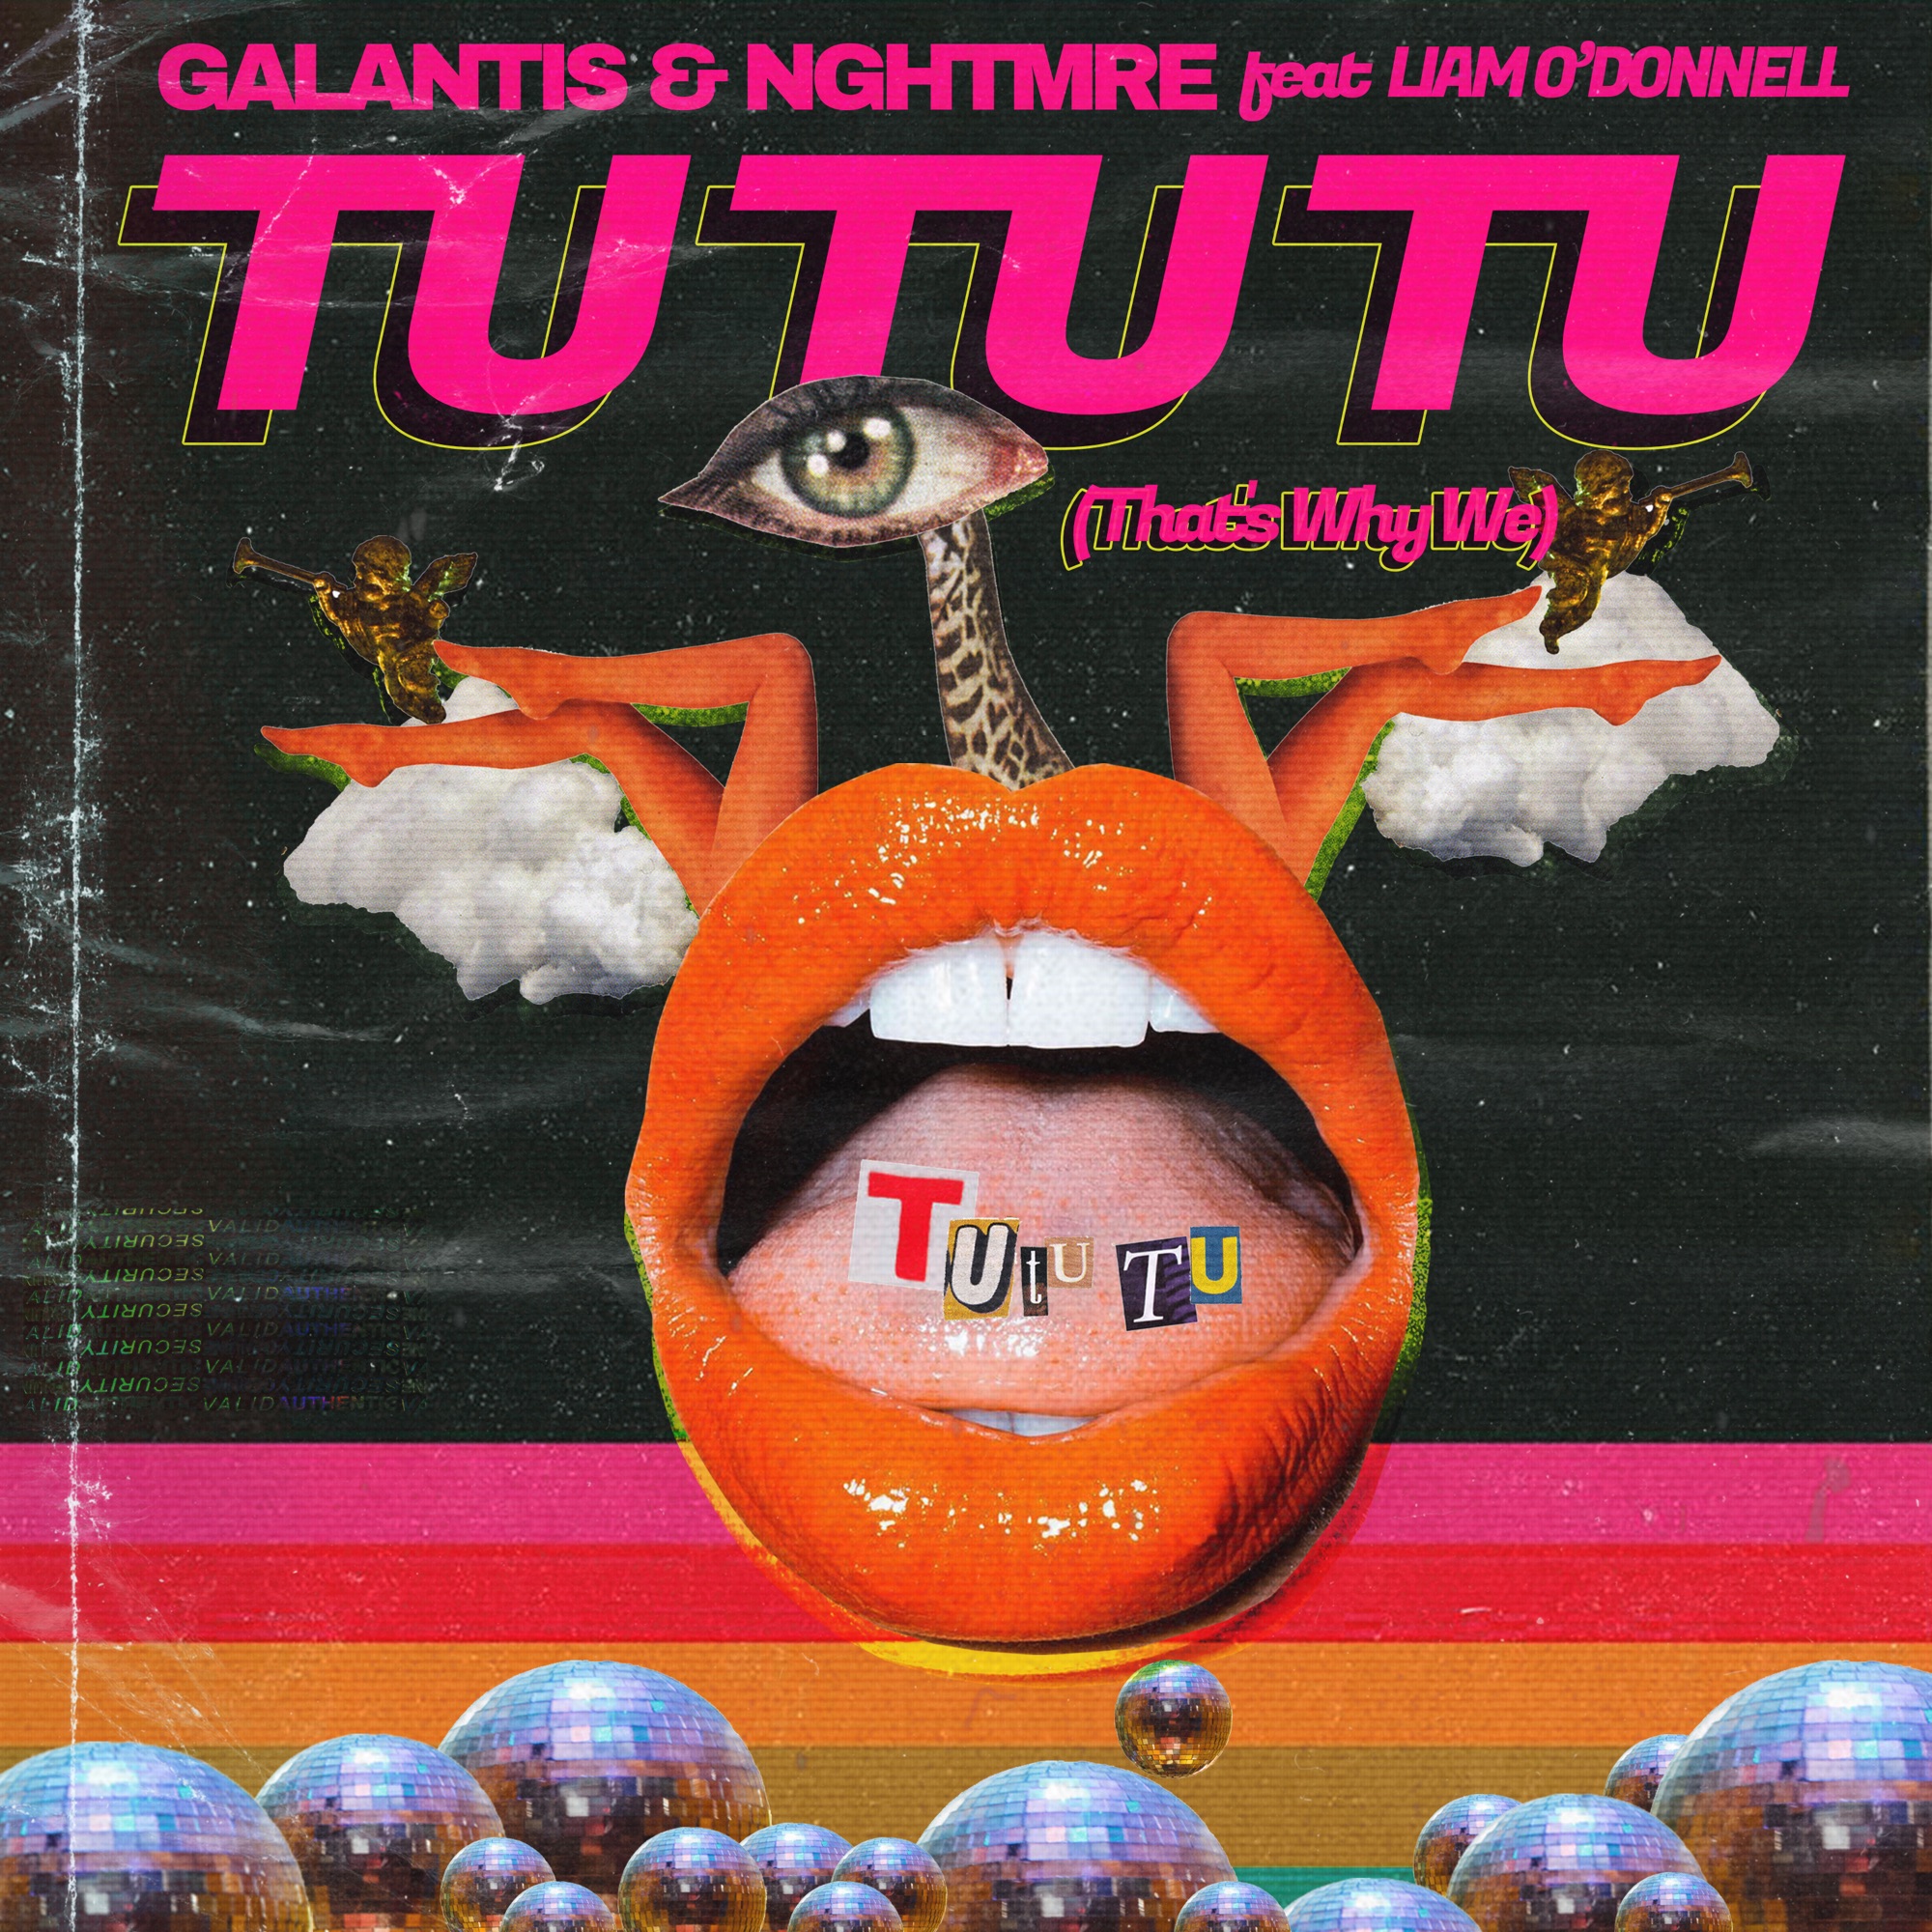 Galantis & NGHTMRE - Tu Tu Tu (That's Why We) [feat. Liam O'Donnell] - Single